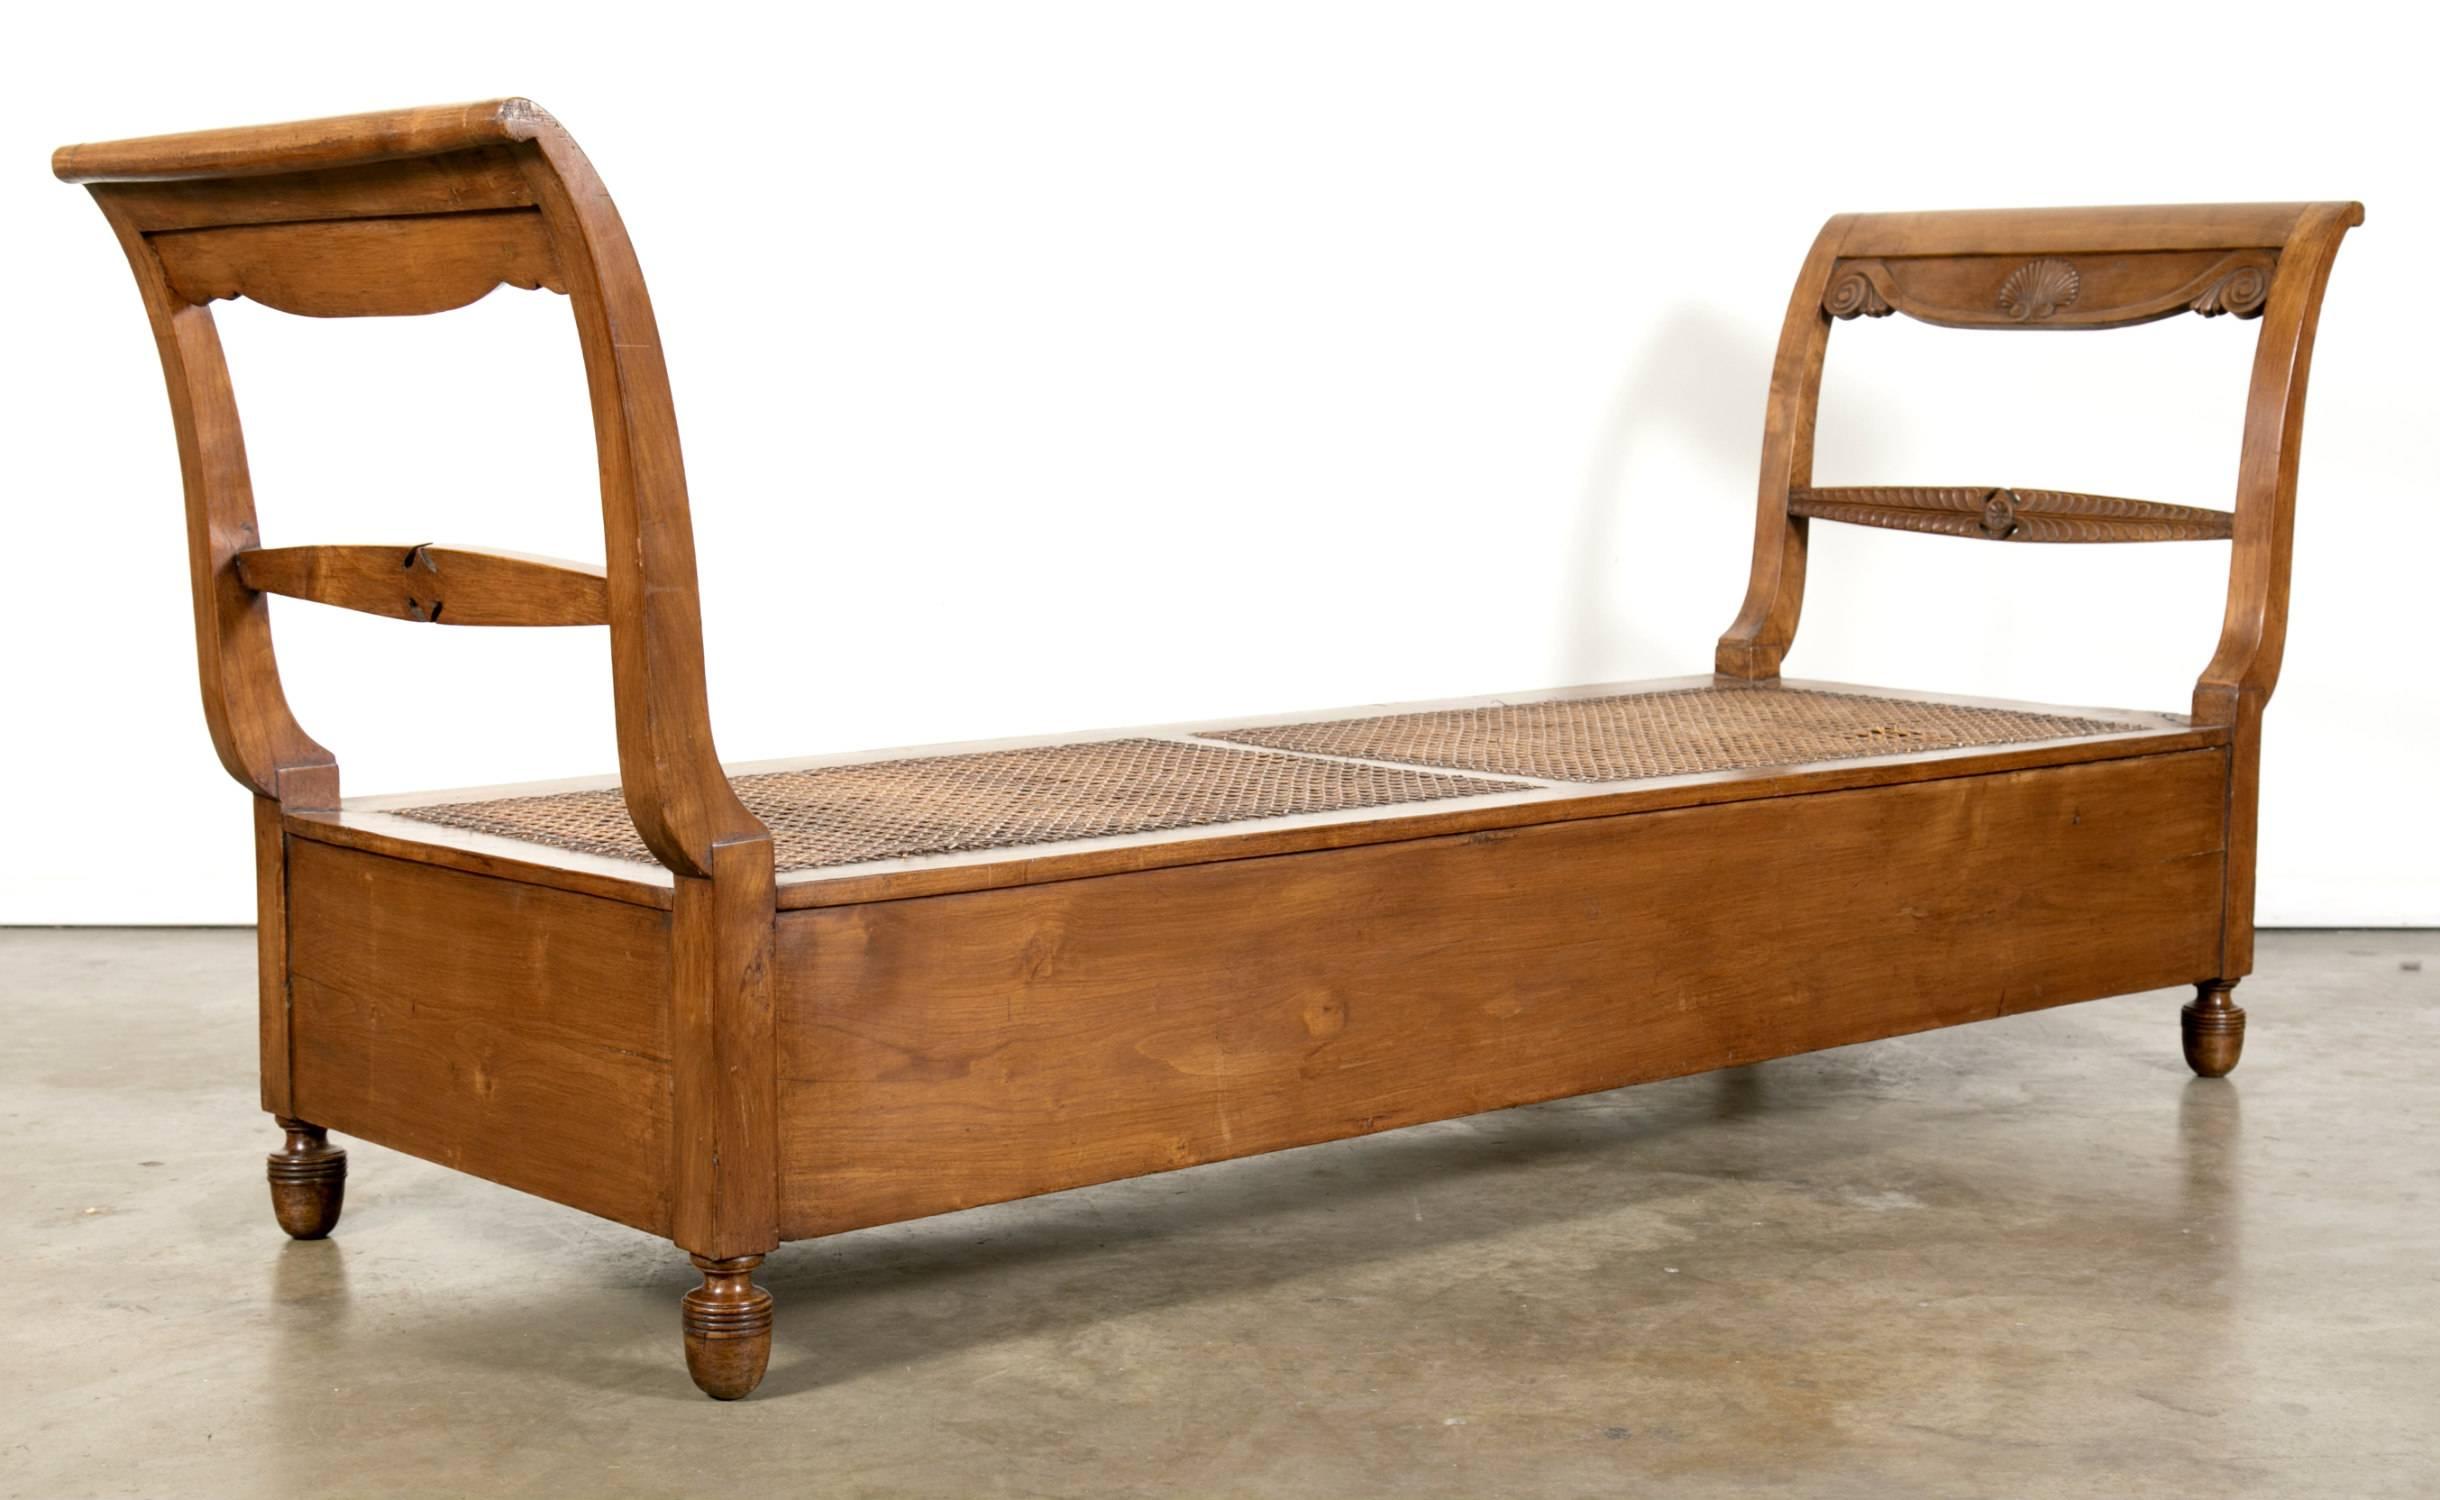 Country Antique French Provencal Cherry Daybed with Cane Seat